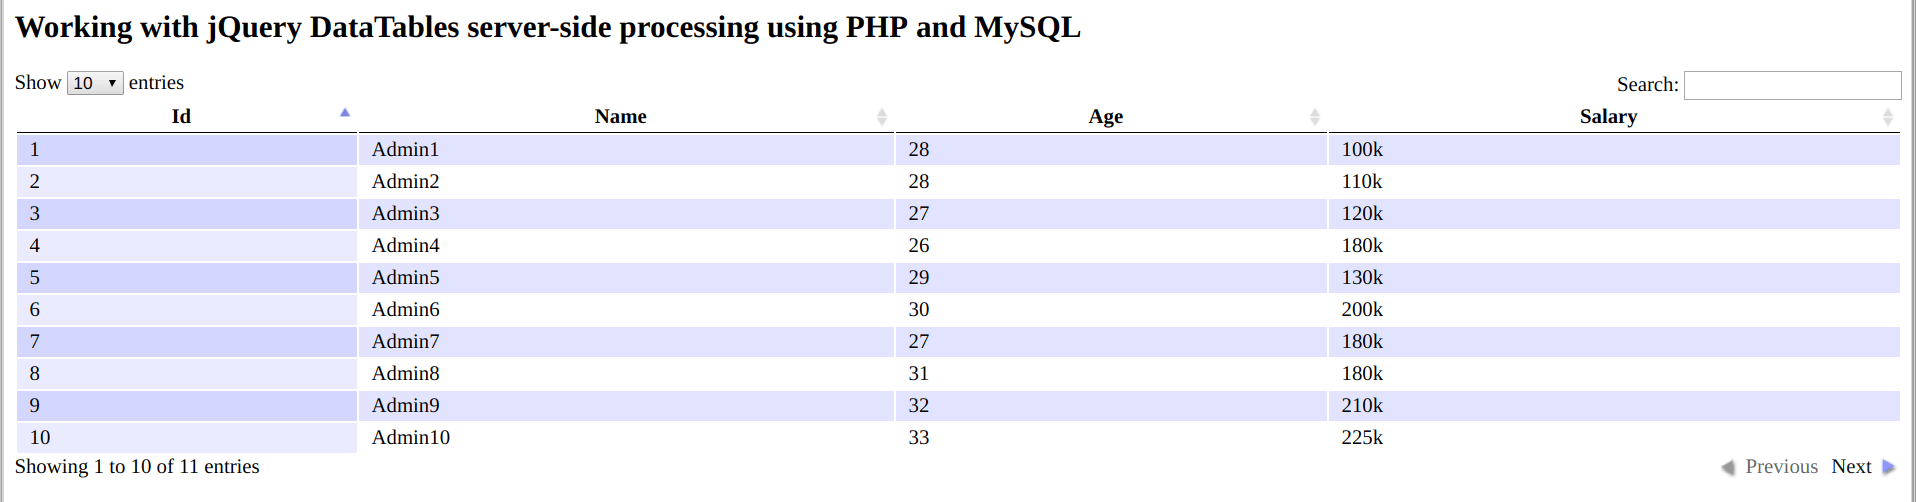 Working with jQuery DataTables server-side processing using PHP and MySQL